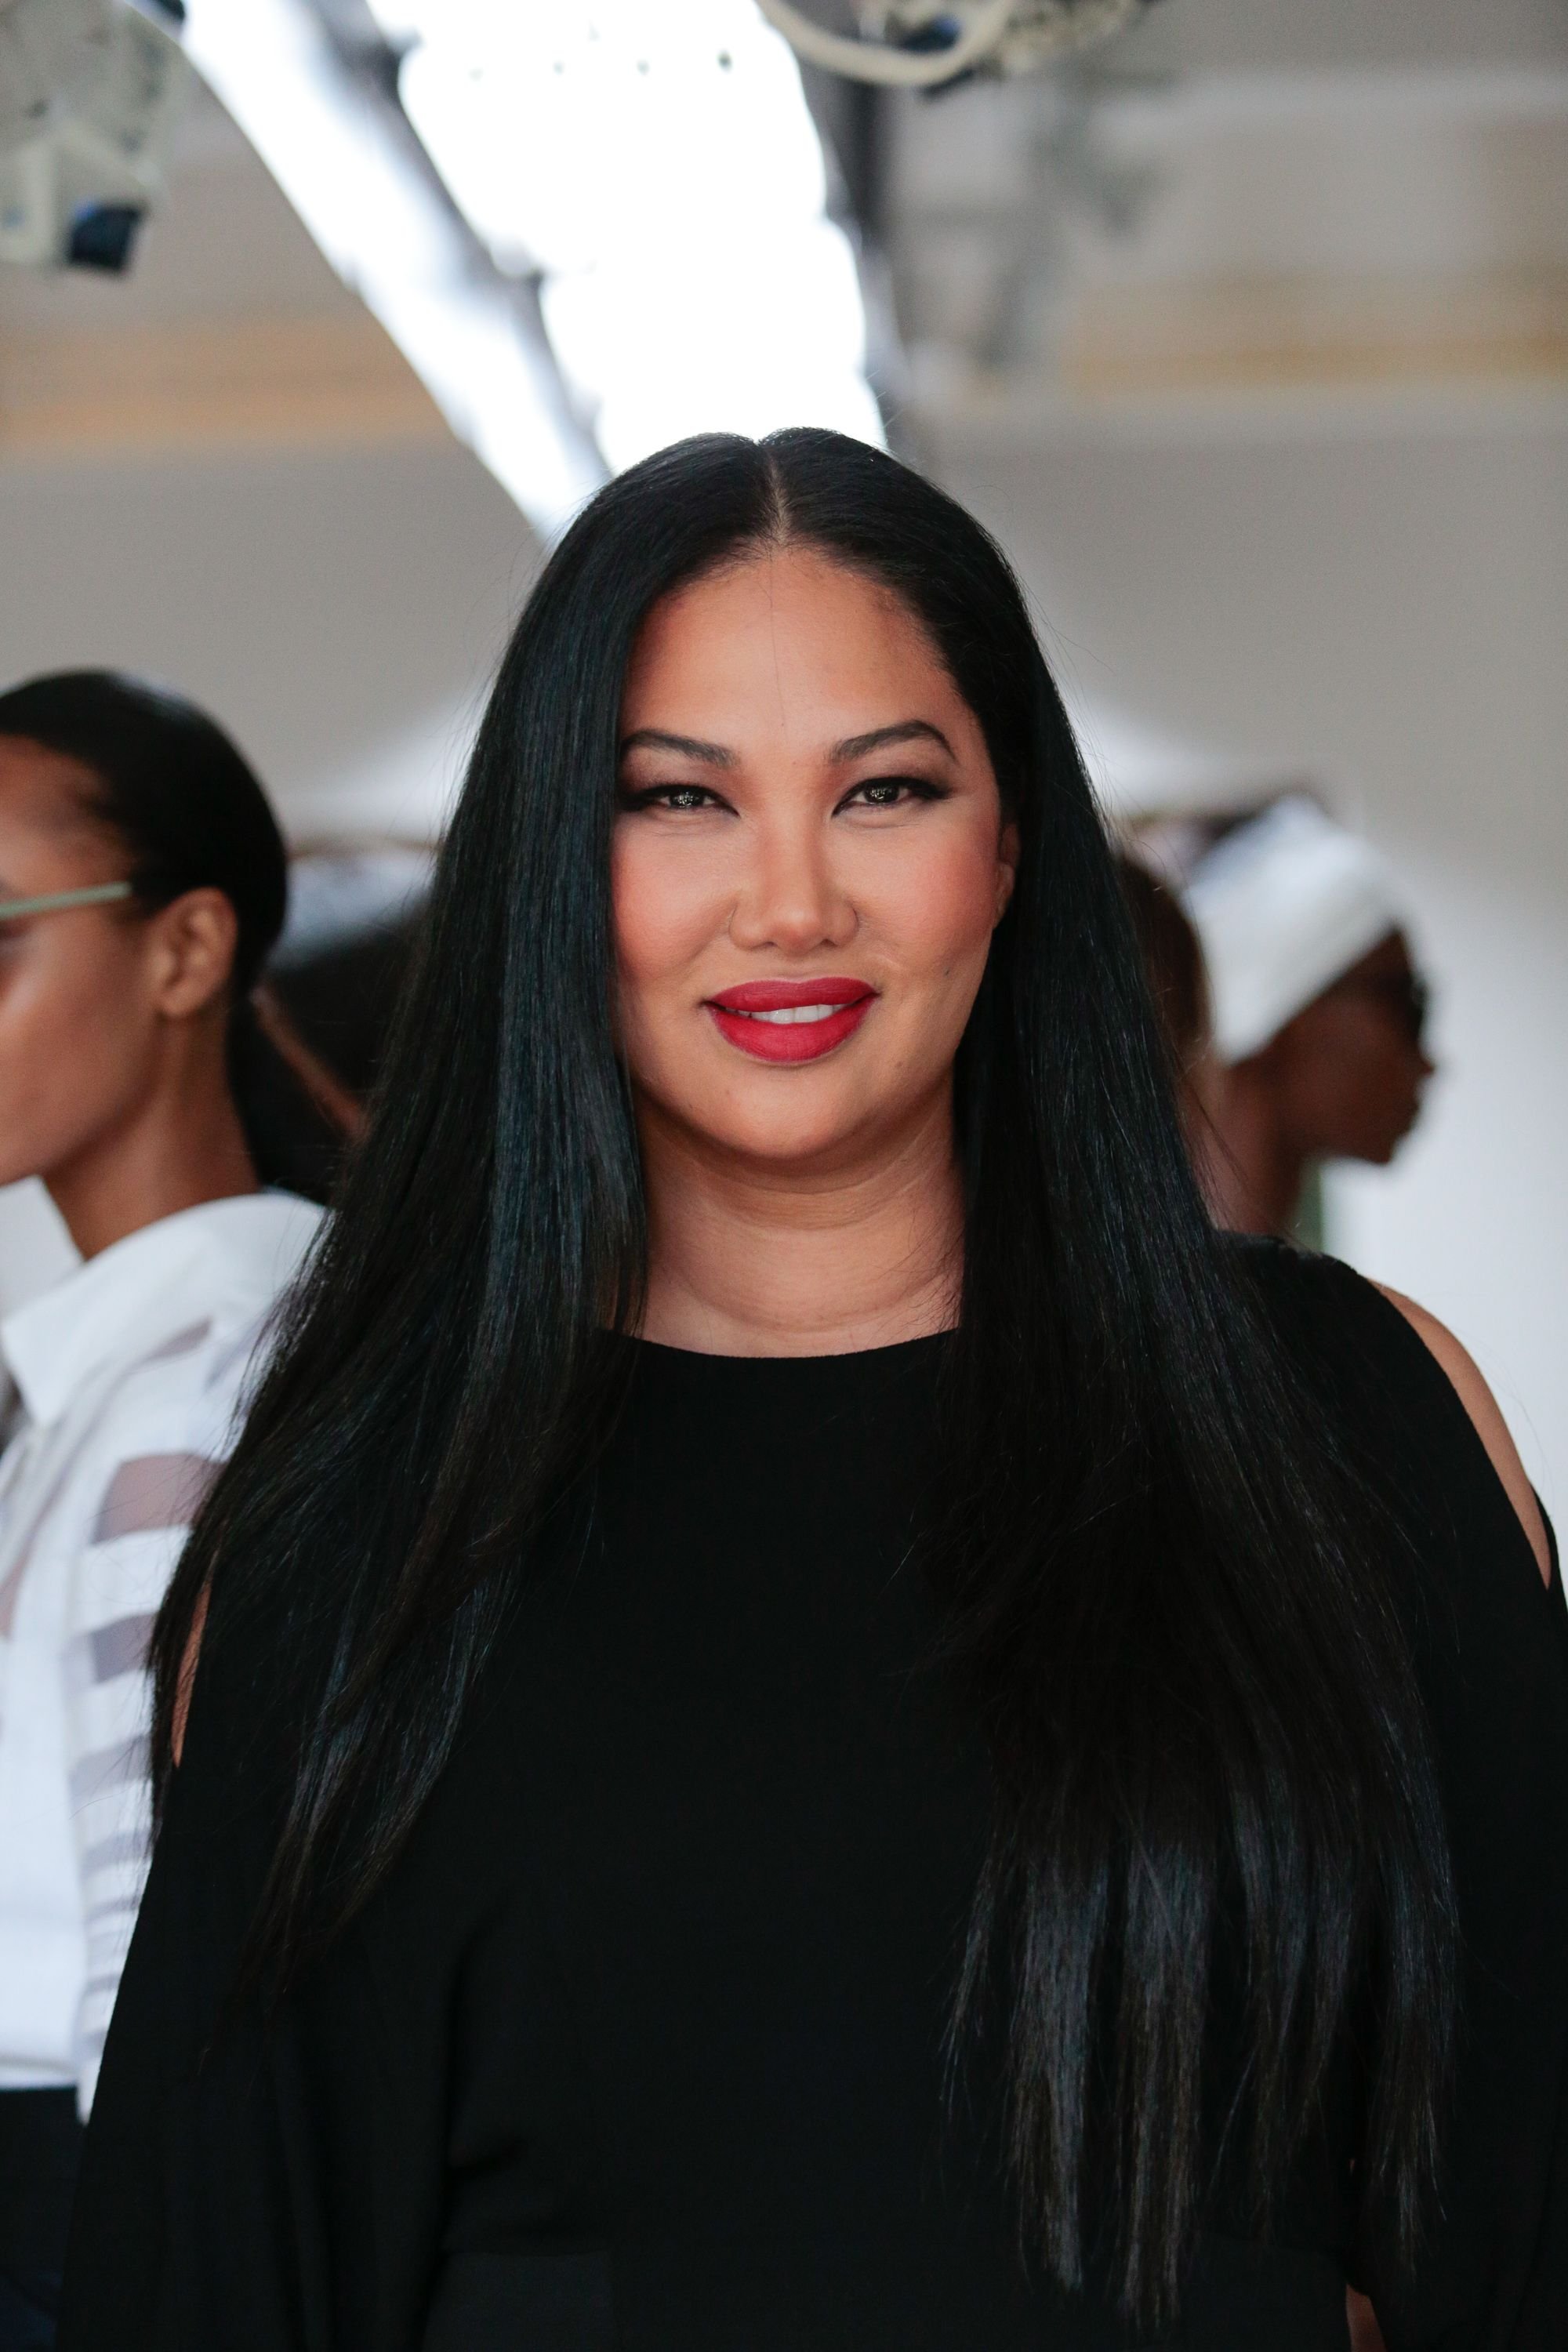 Kimora Lee Simmons attends the New York Fashion Week at The Gallery, Skylight at Clarkson Square on September 14, 2016. | Photo: Getty Images